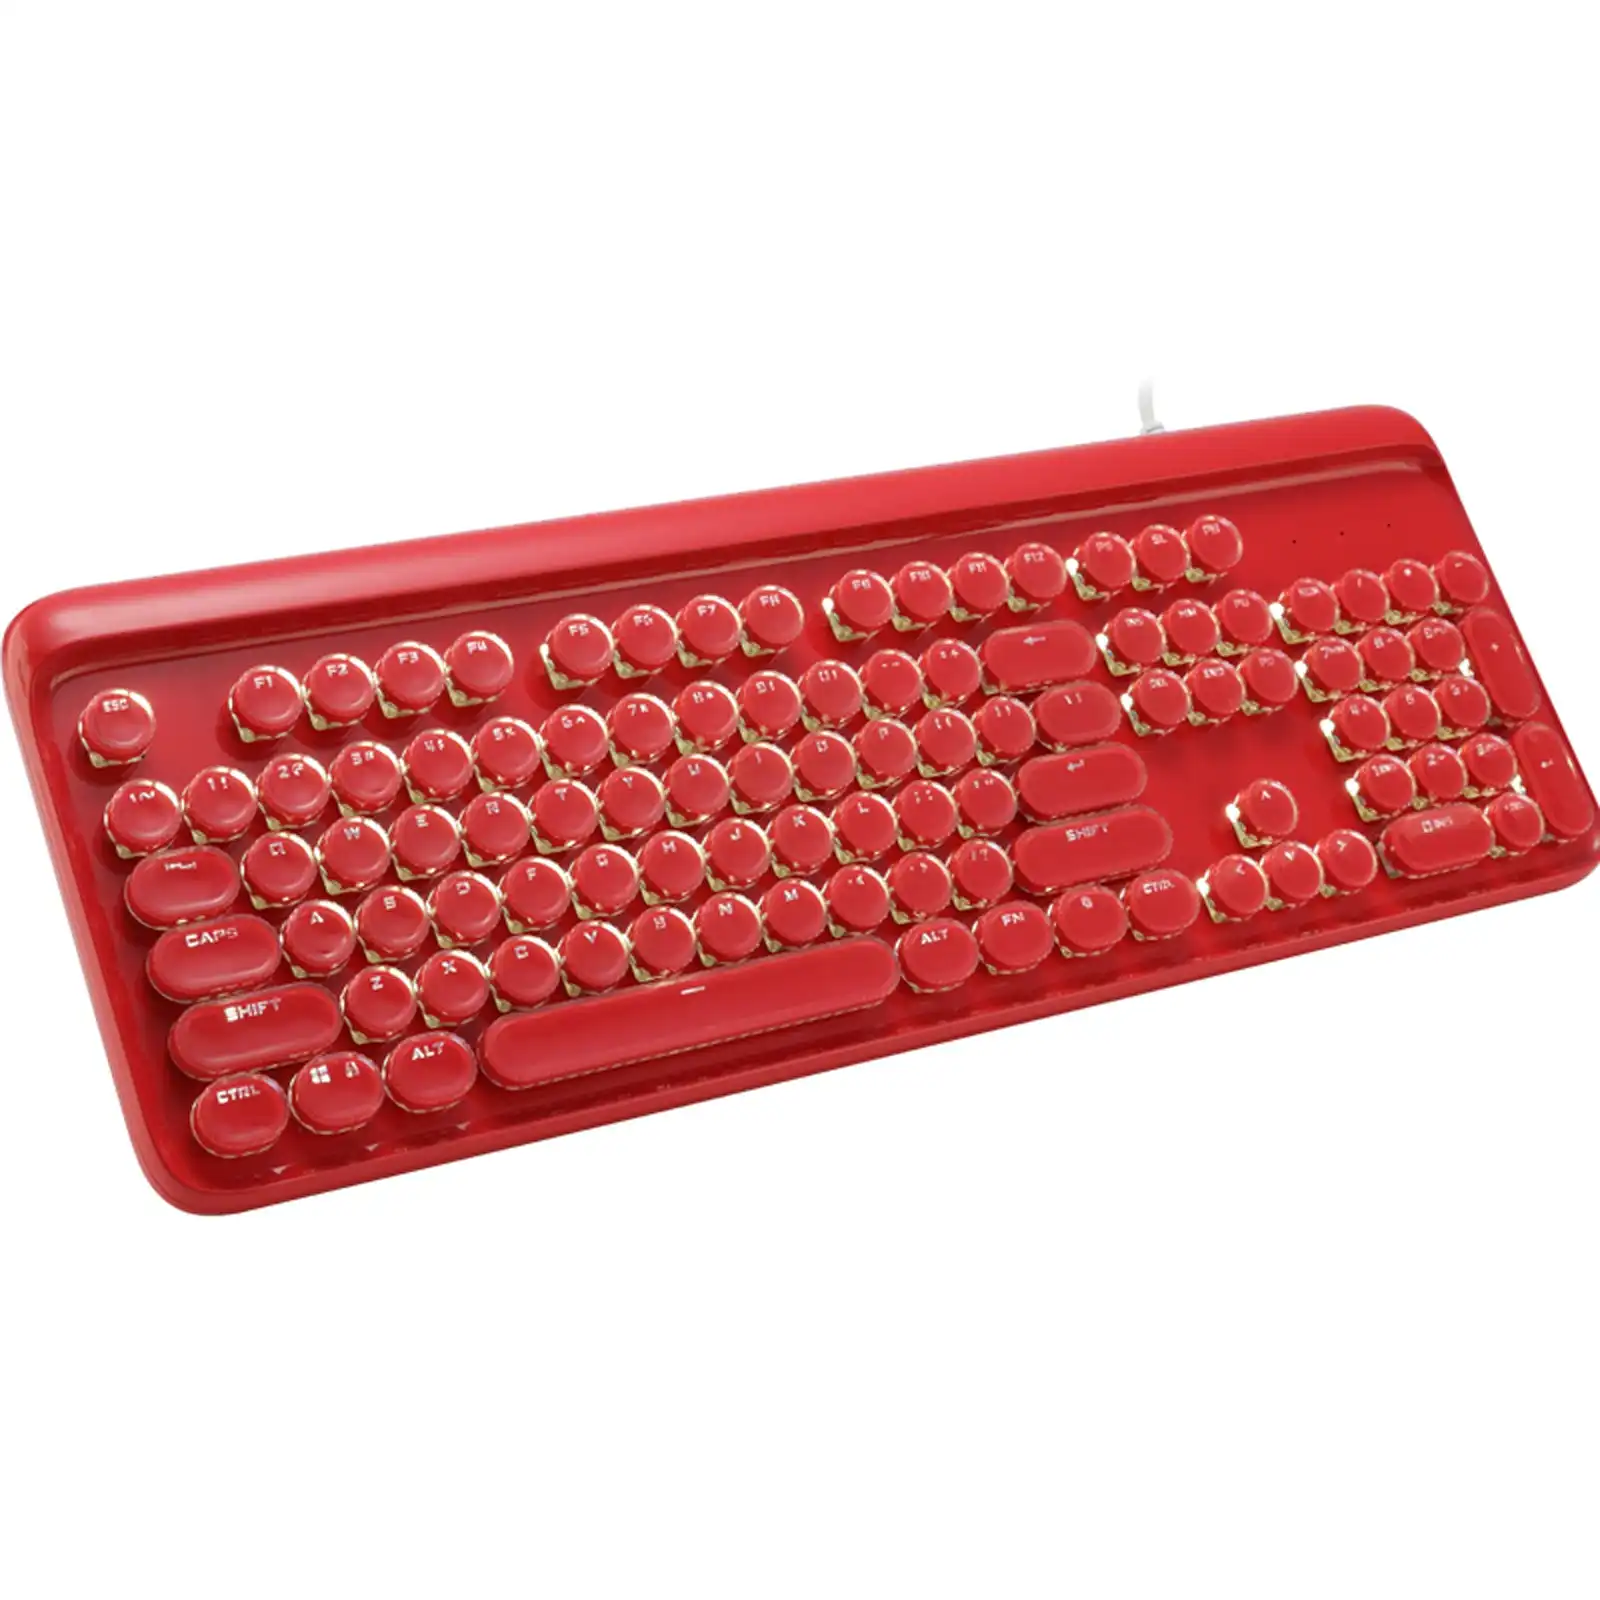 TODO Mechanical Gaming Keyboard Linear Blue Switch Led Backlit 104 Key Windows - Red